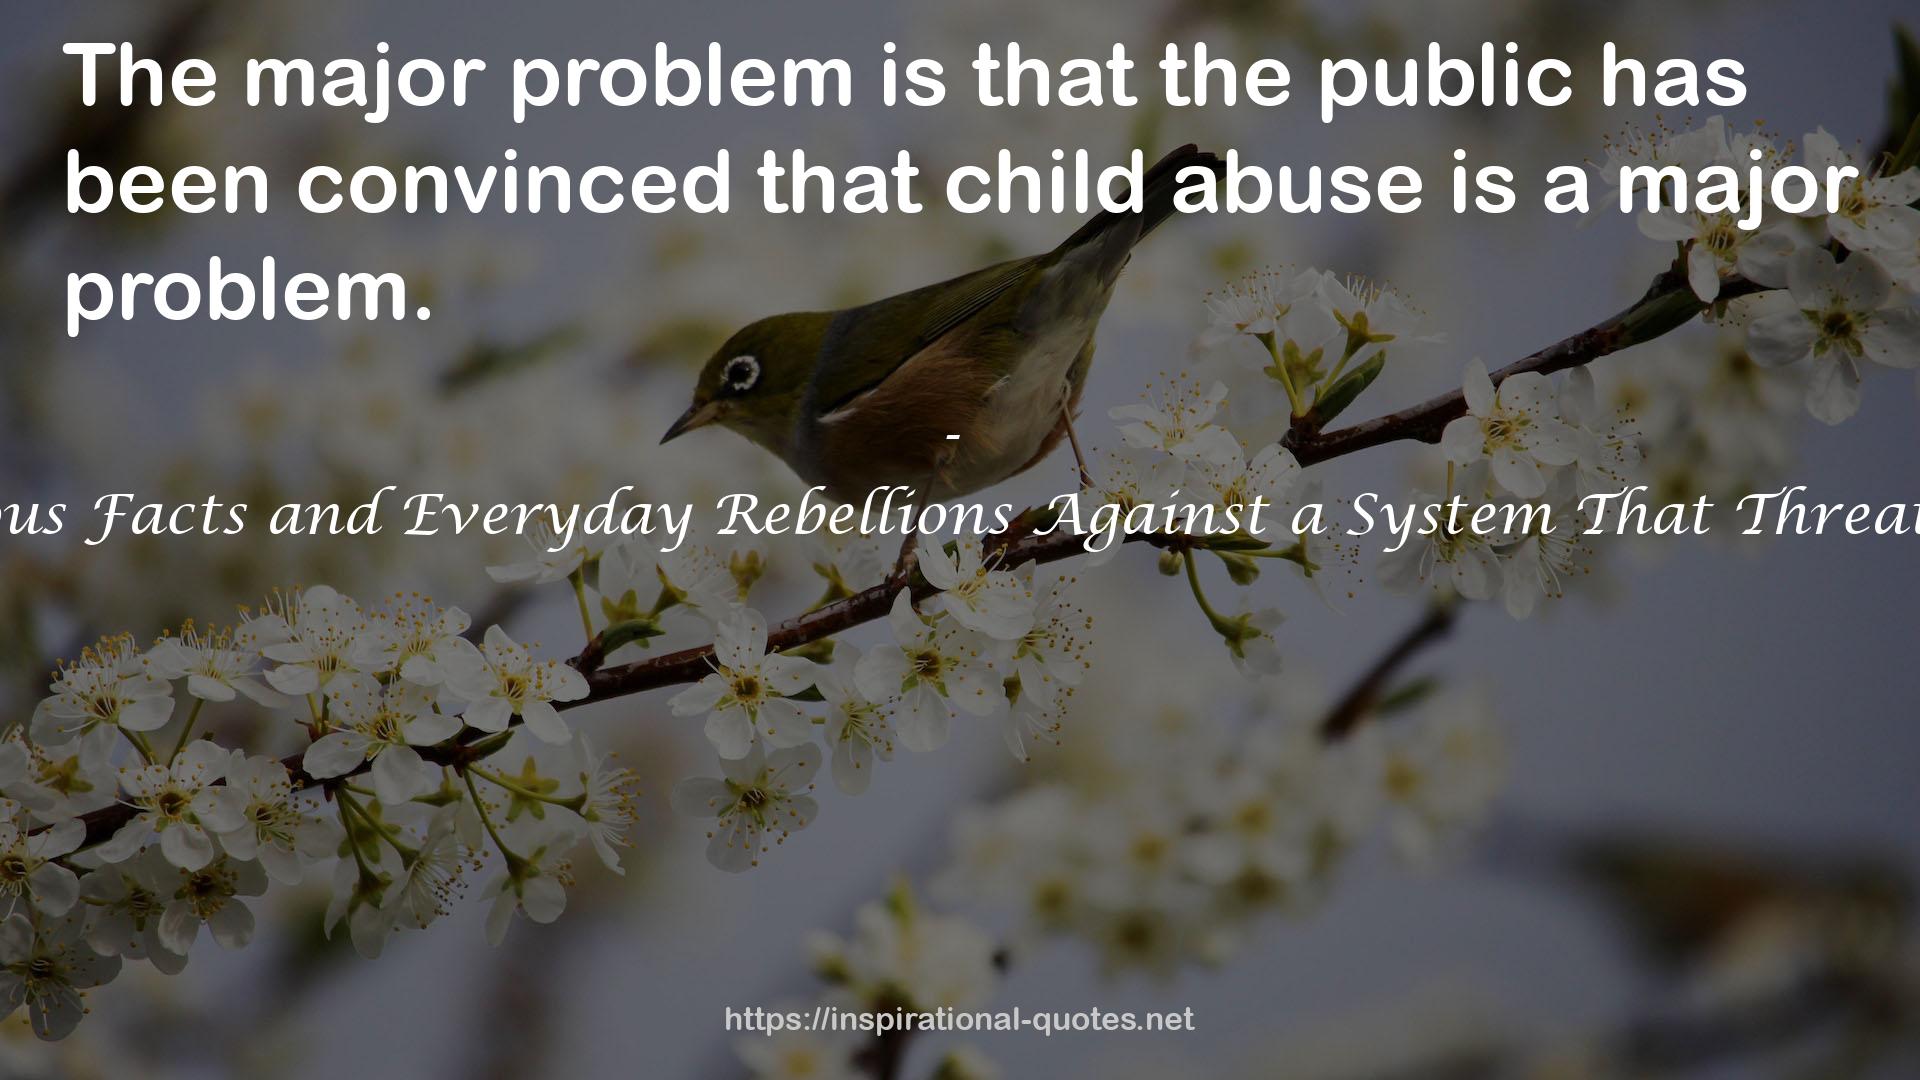 The Child Abuse Industry: Outrageous Facts and Everyday Rebellions Against a System That Threatens Every North American Family QUOTES